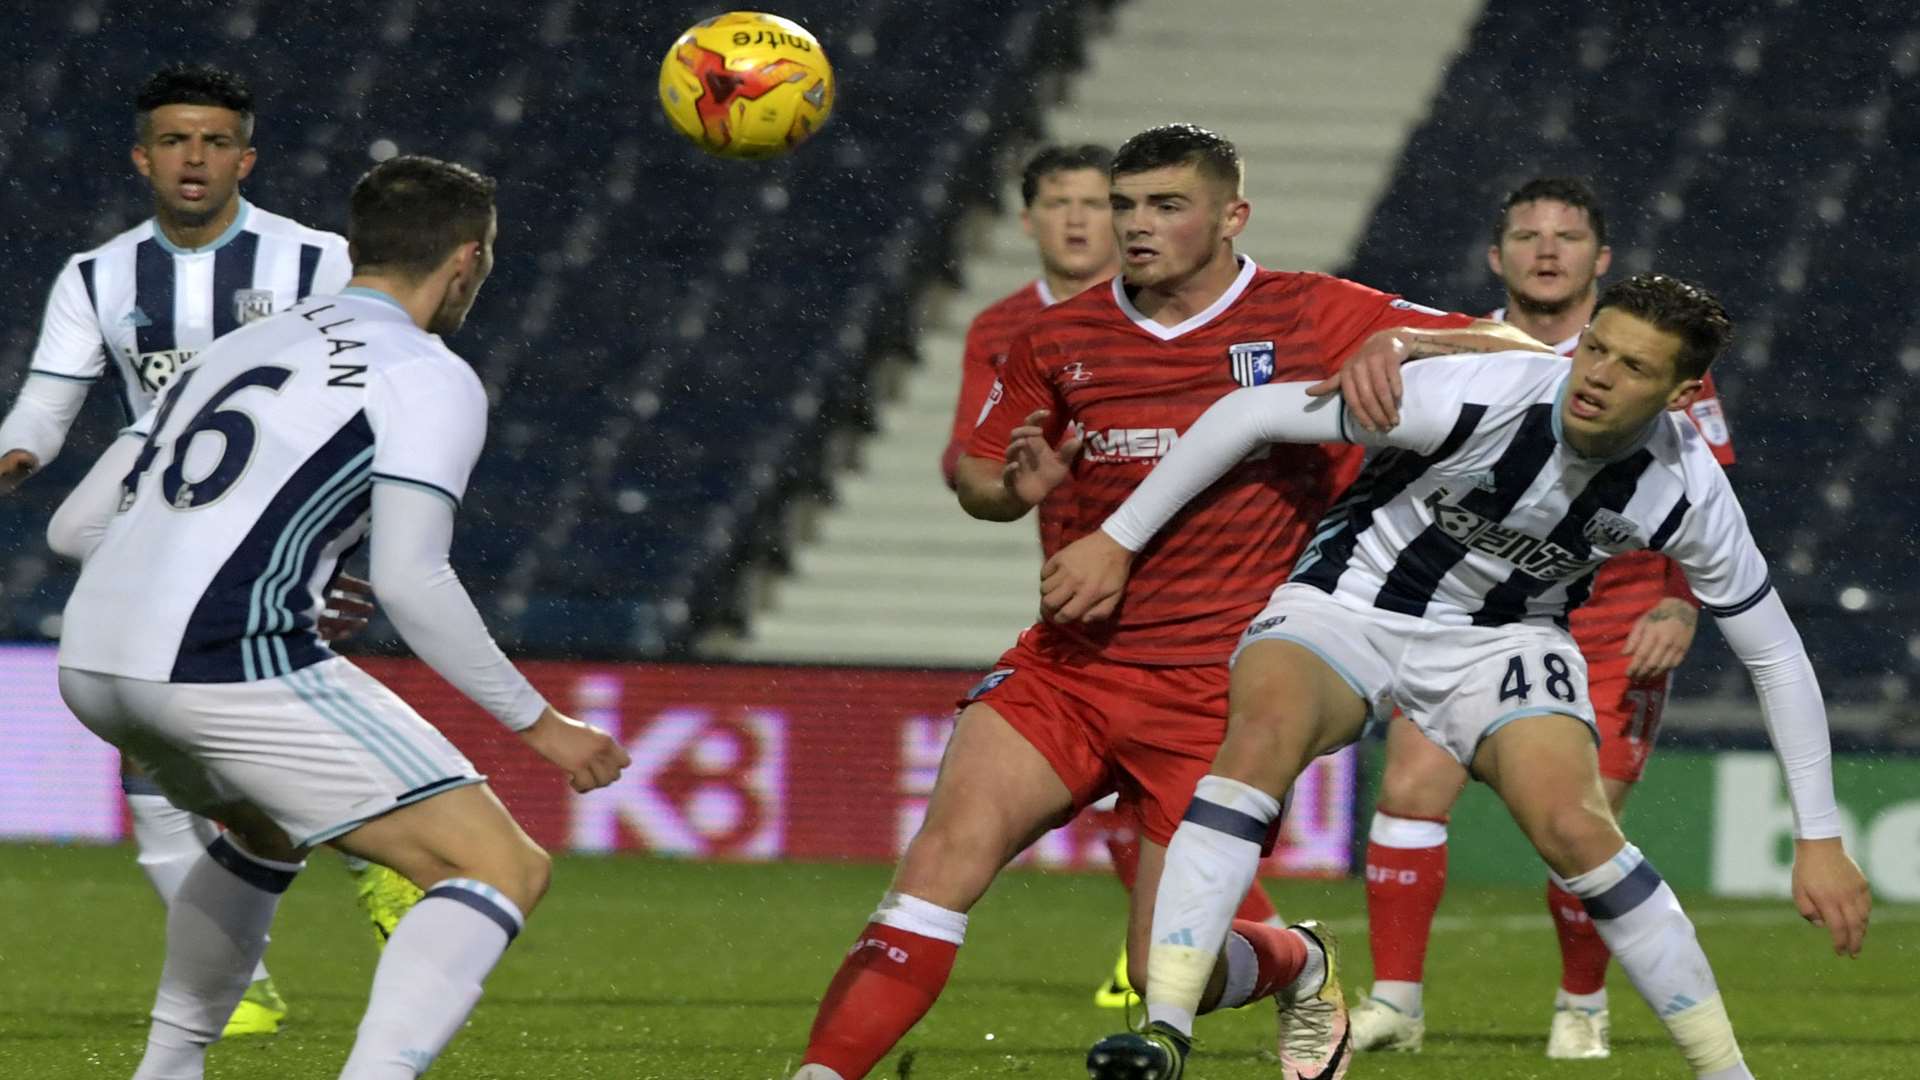 Rory Donnelly puts the Baggies defence under pressure Picture: Barry Goodwin